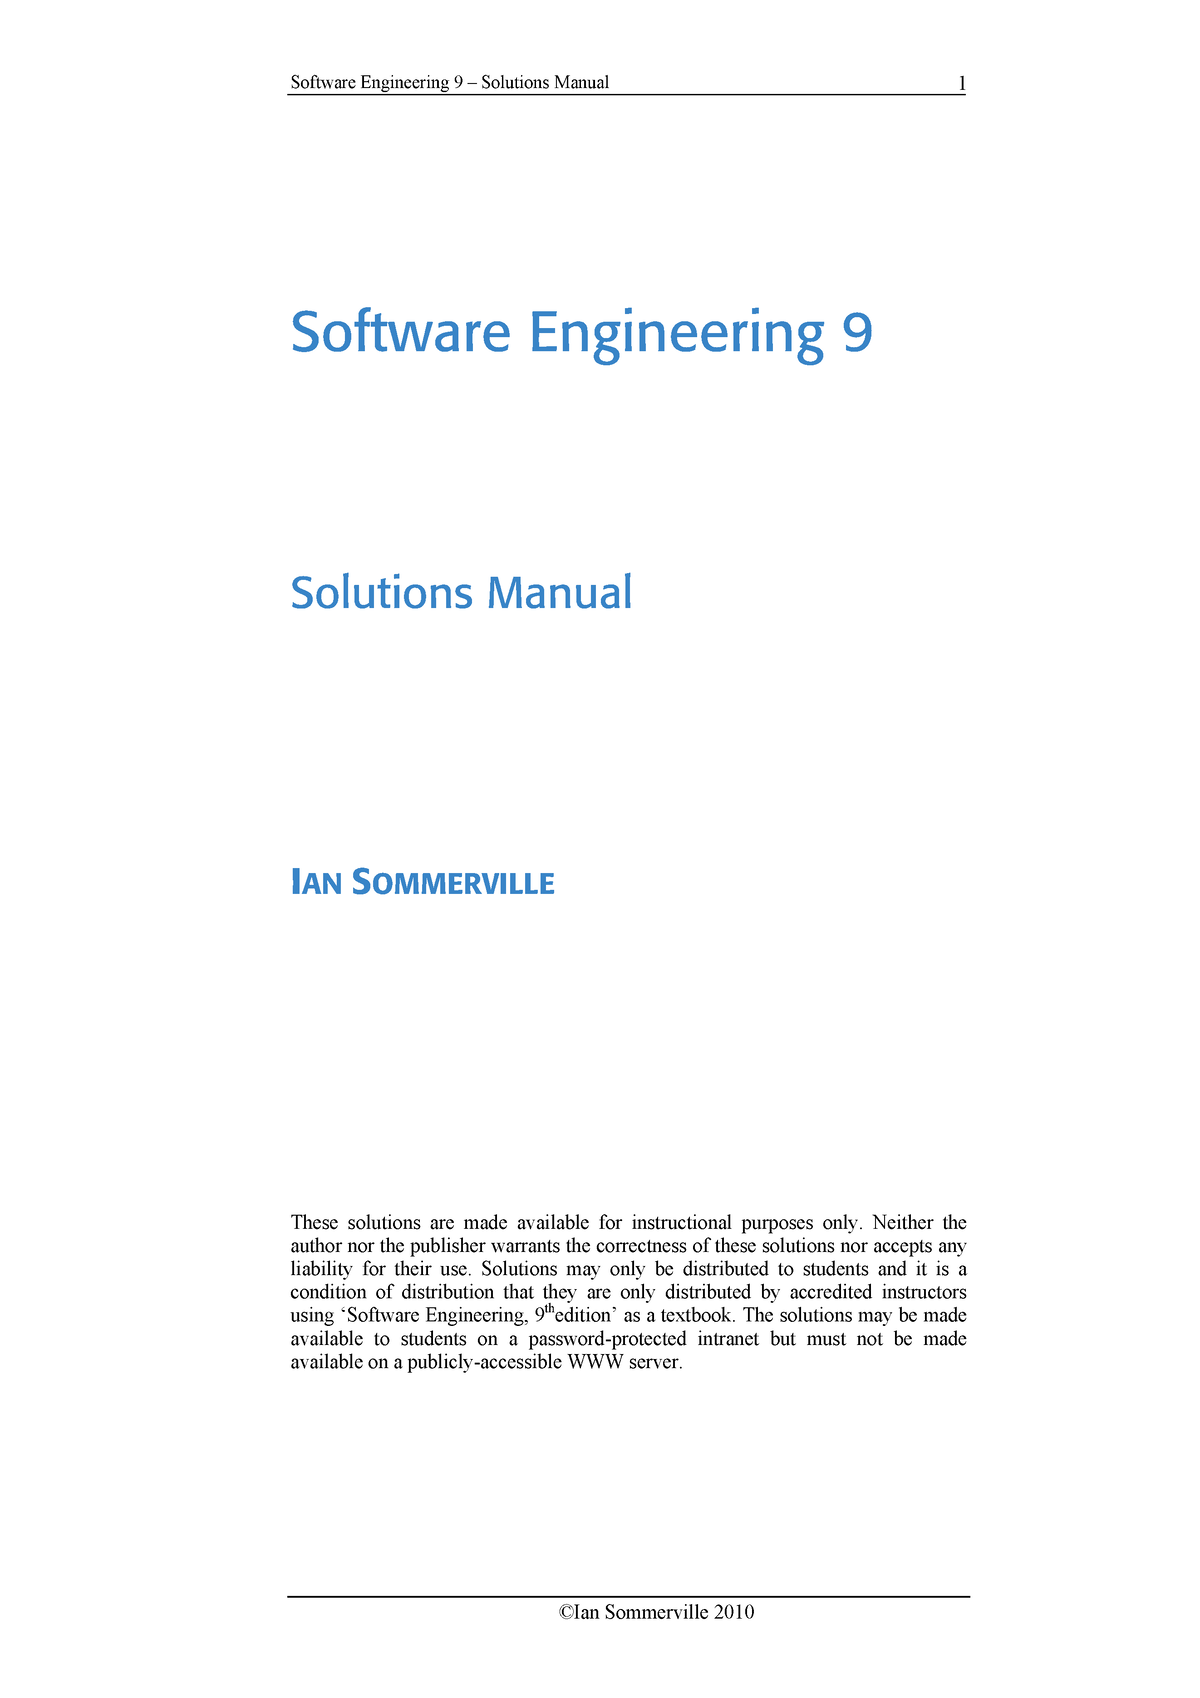 Software Engineering 9 Solutions Manual Software Engineering 9 Solutions Manual 1 Software 5819